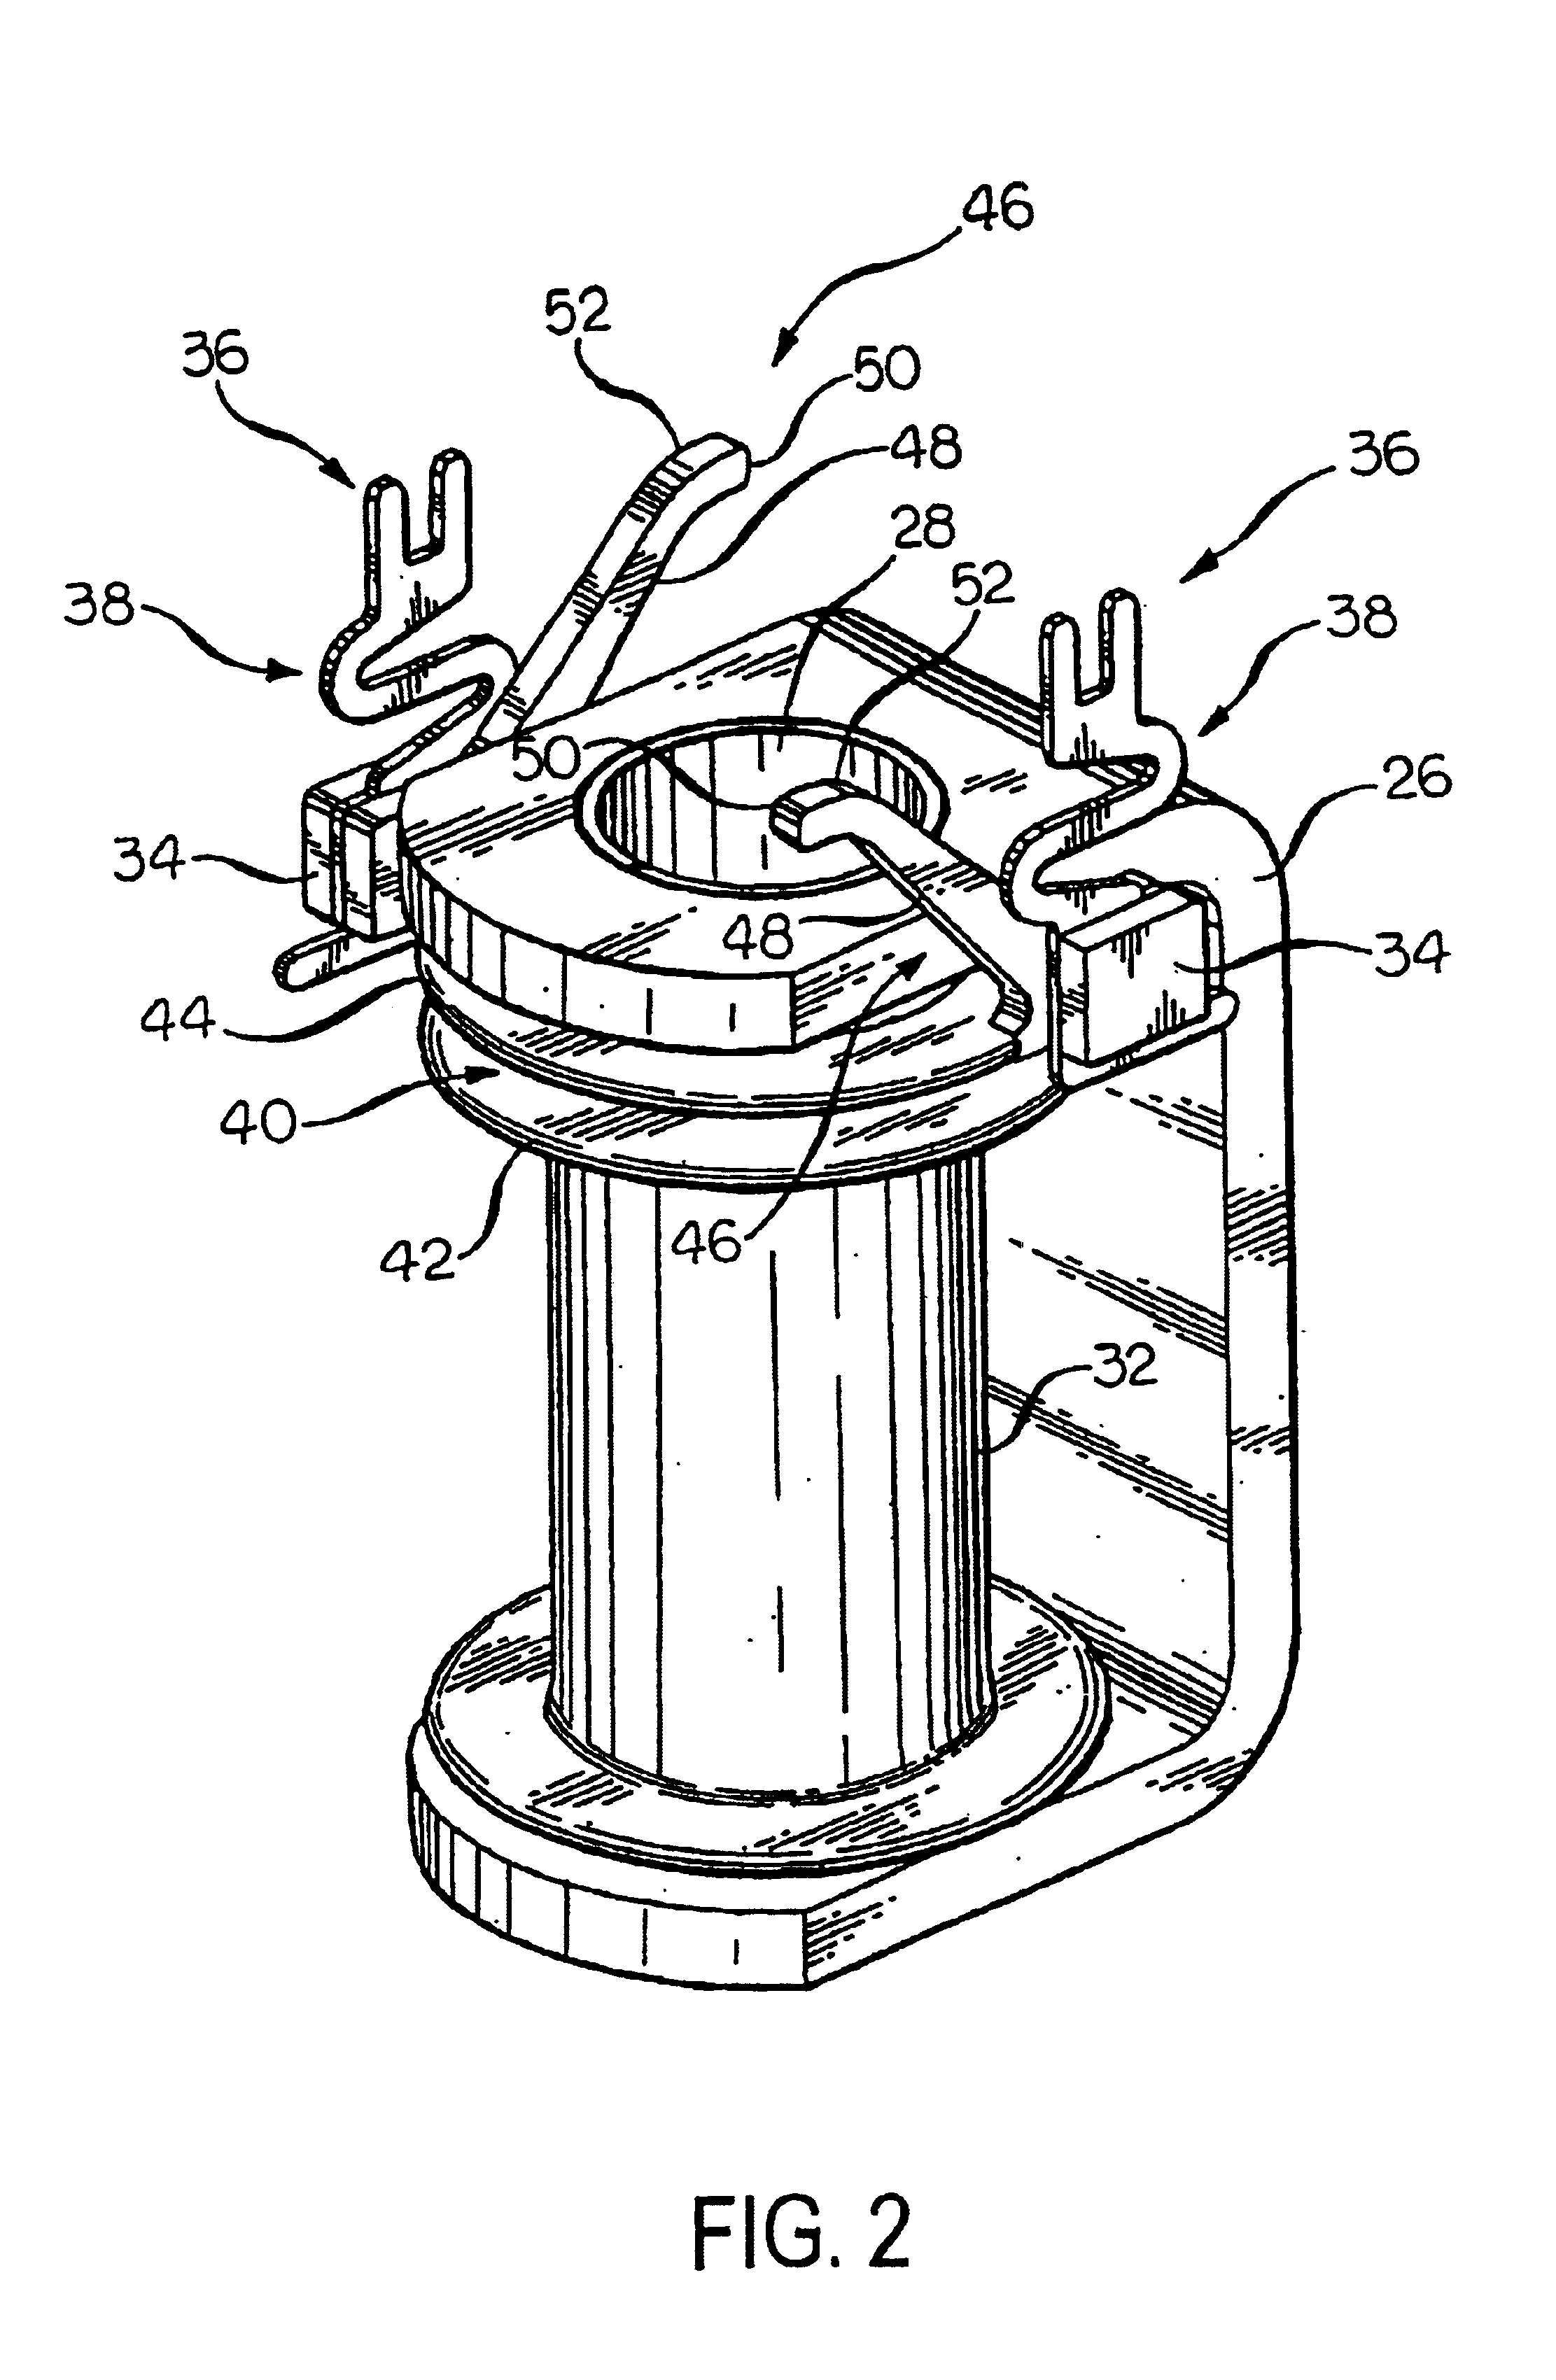 Control unit for vehicle brake system